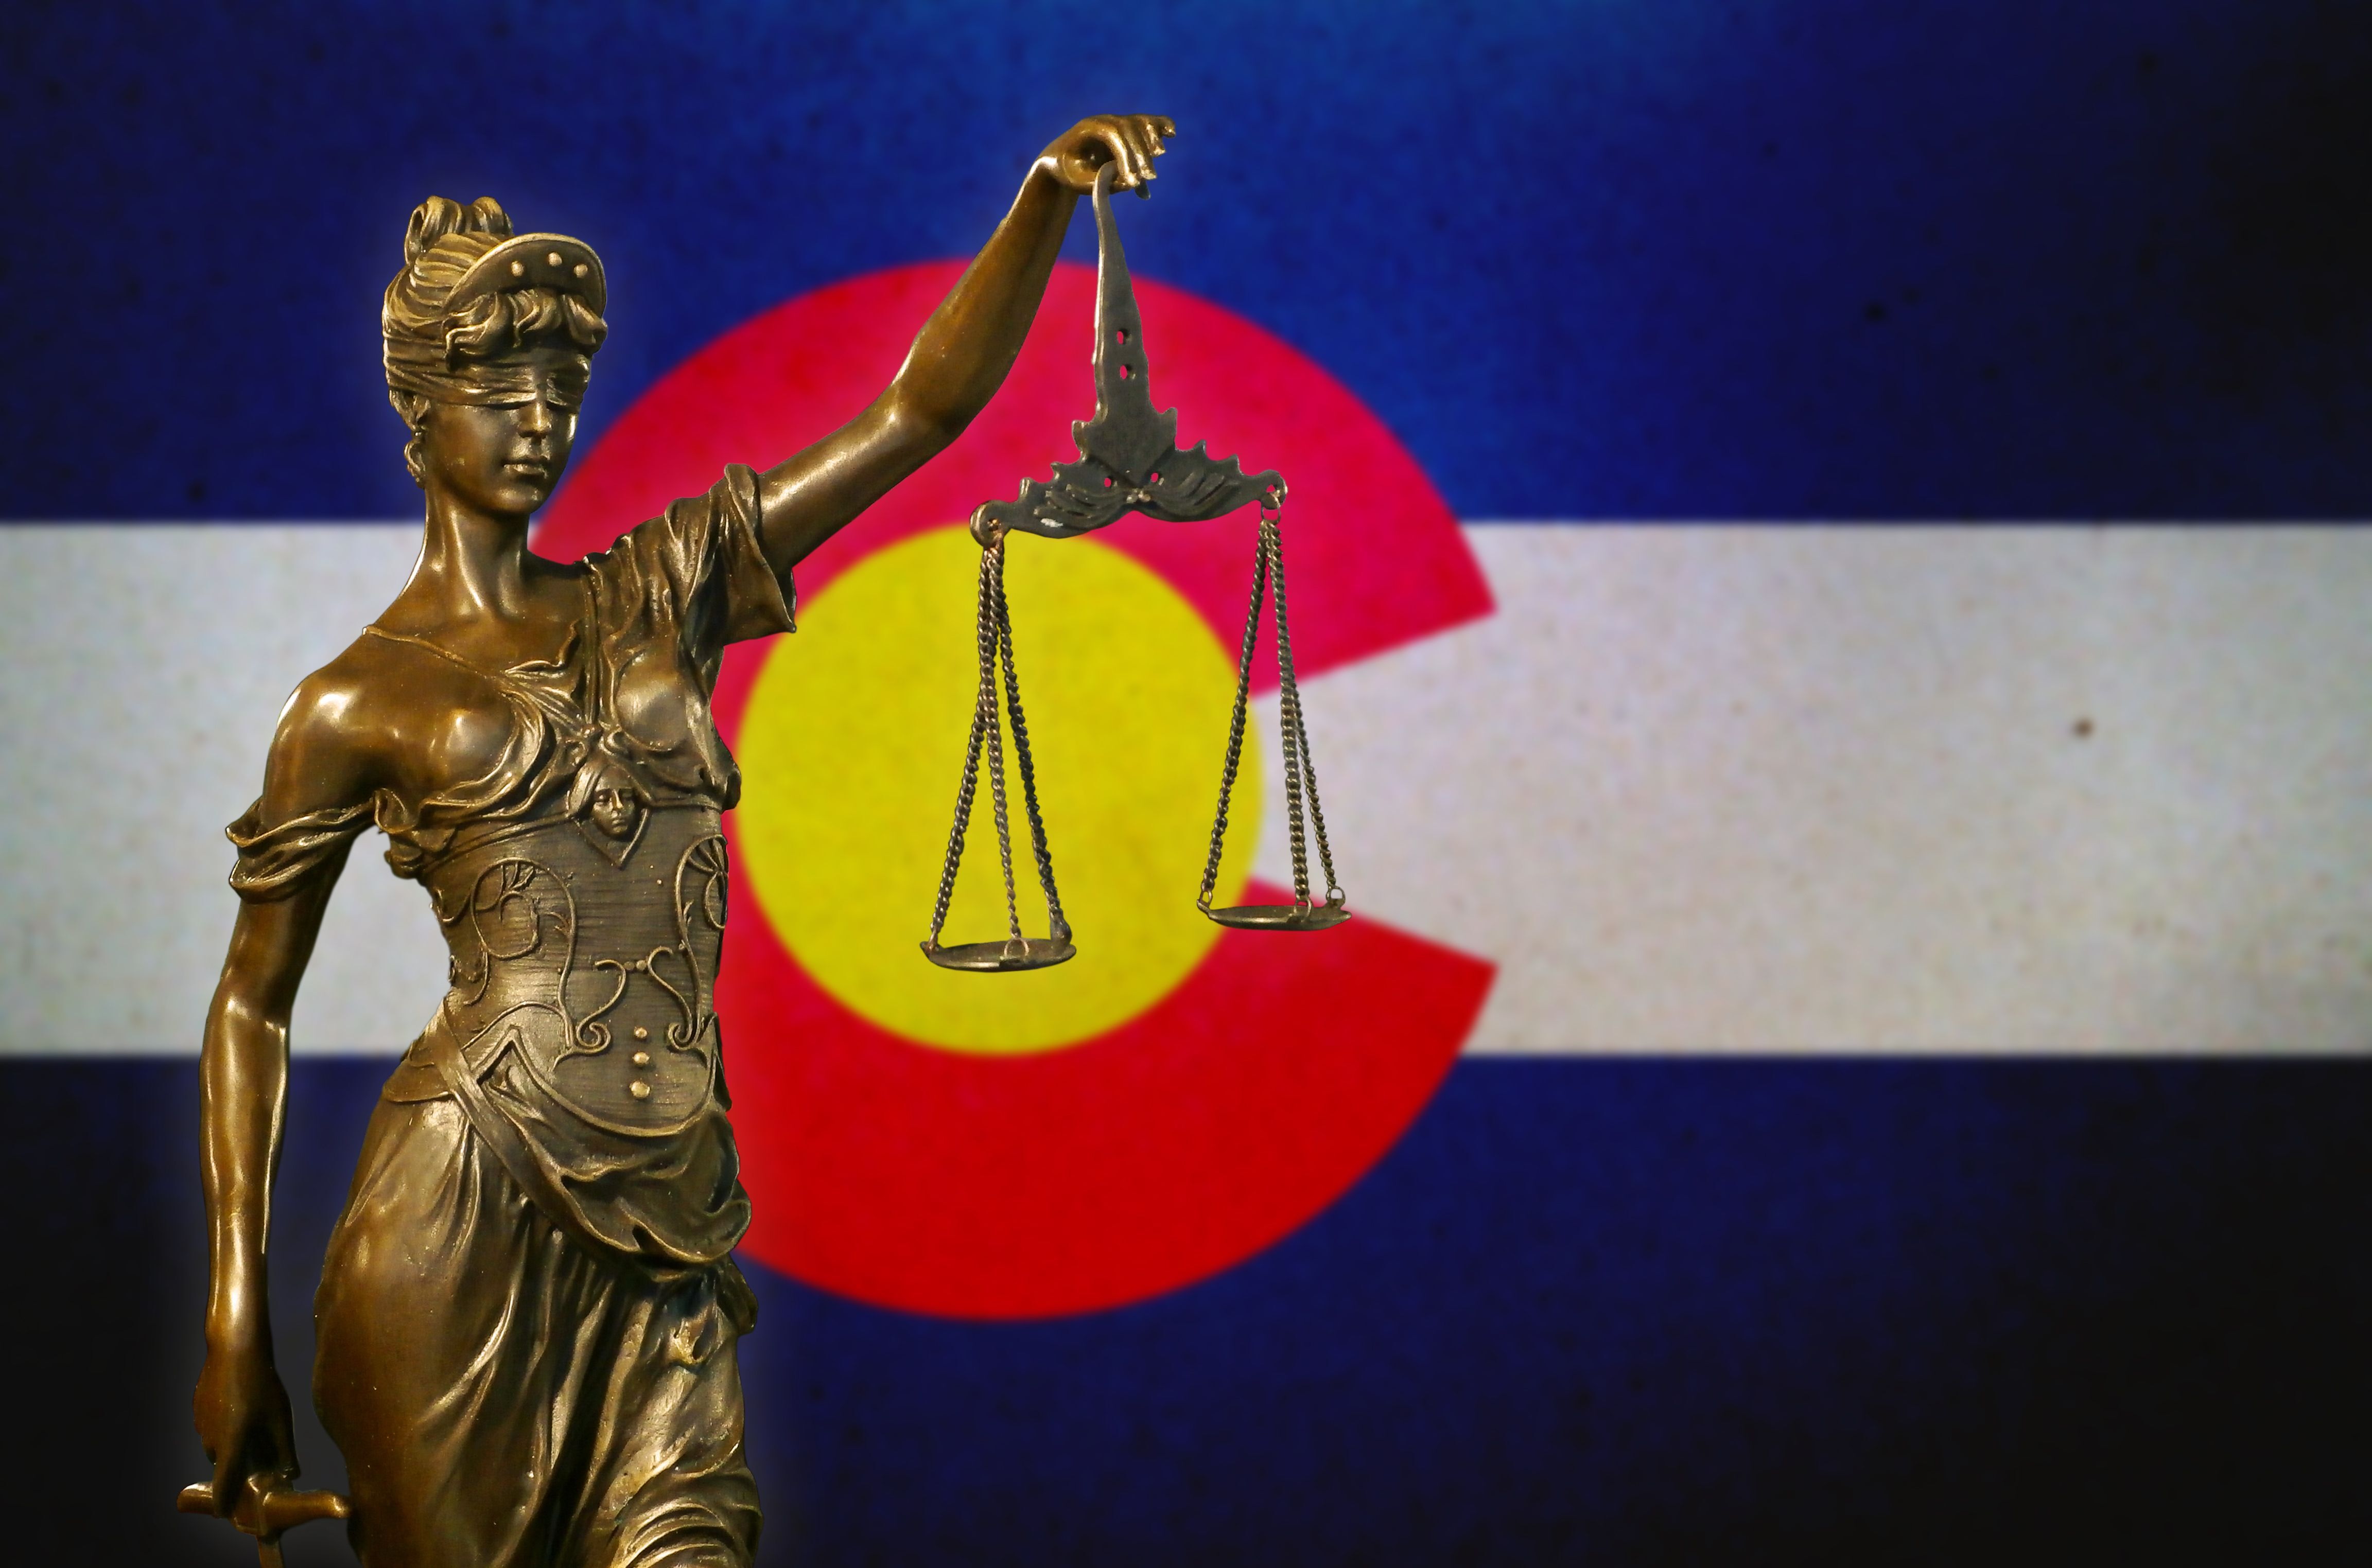 Blindfolded Lady Justice holding scales against a backdrop of the Colorado state flag